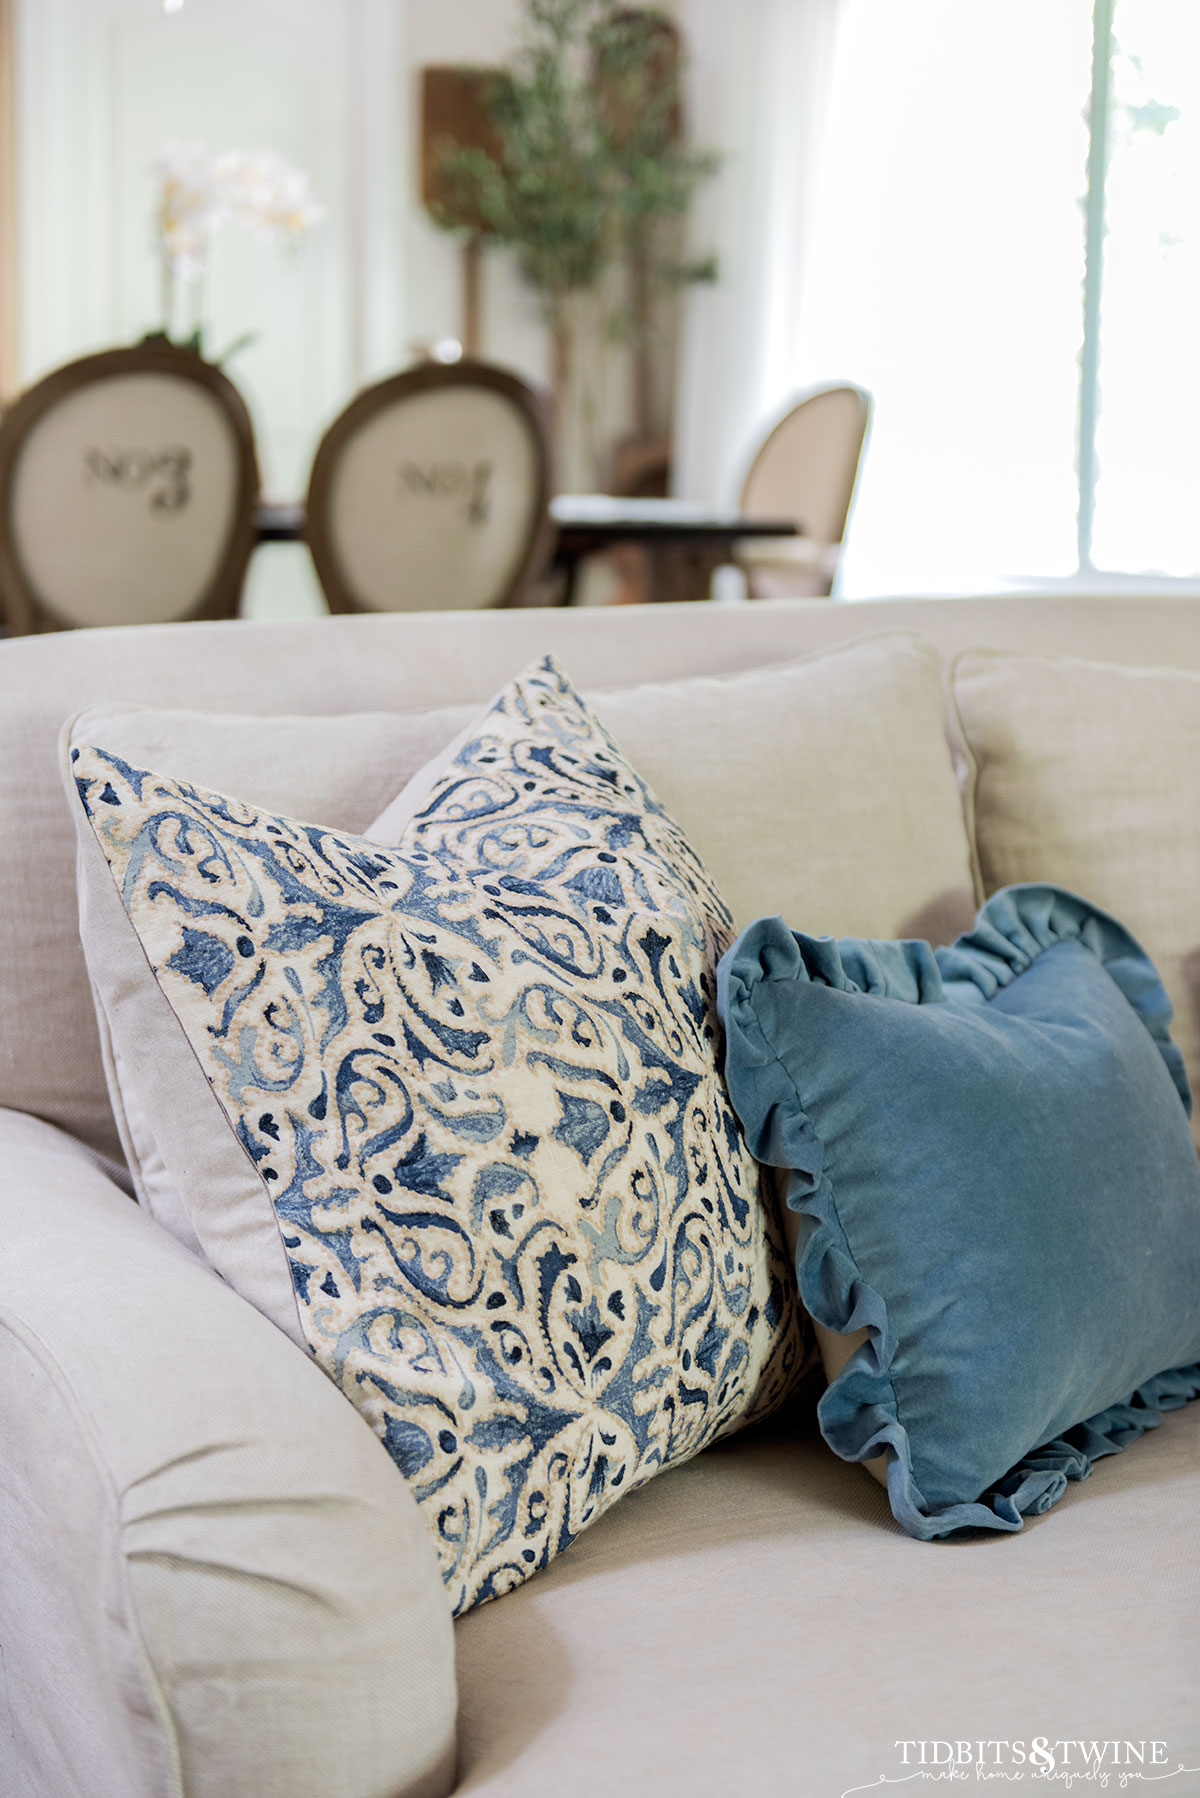 blue ruffle pillow in front of blue and white patterned pillow on belgian linen sofa with dining table in background